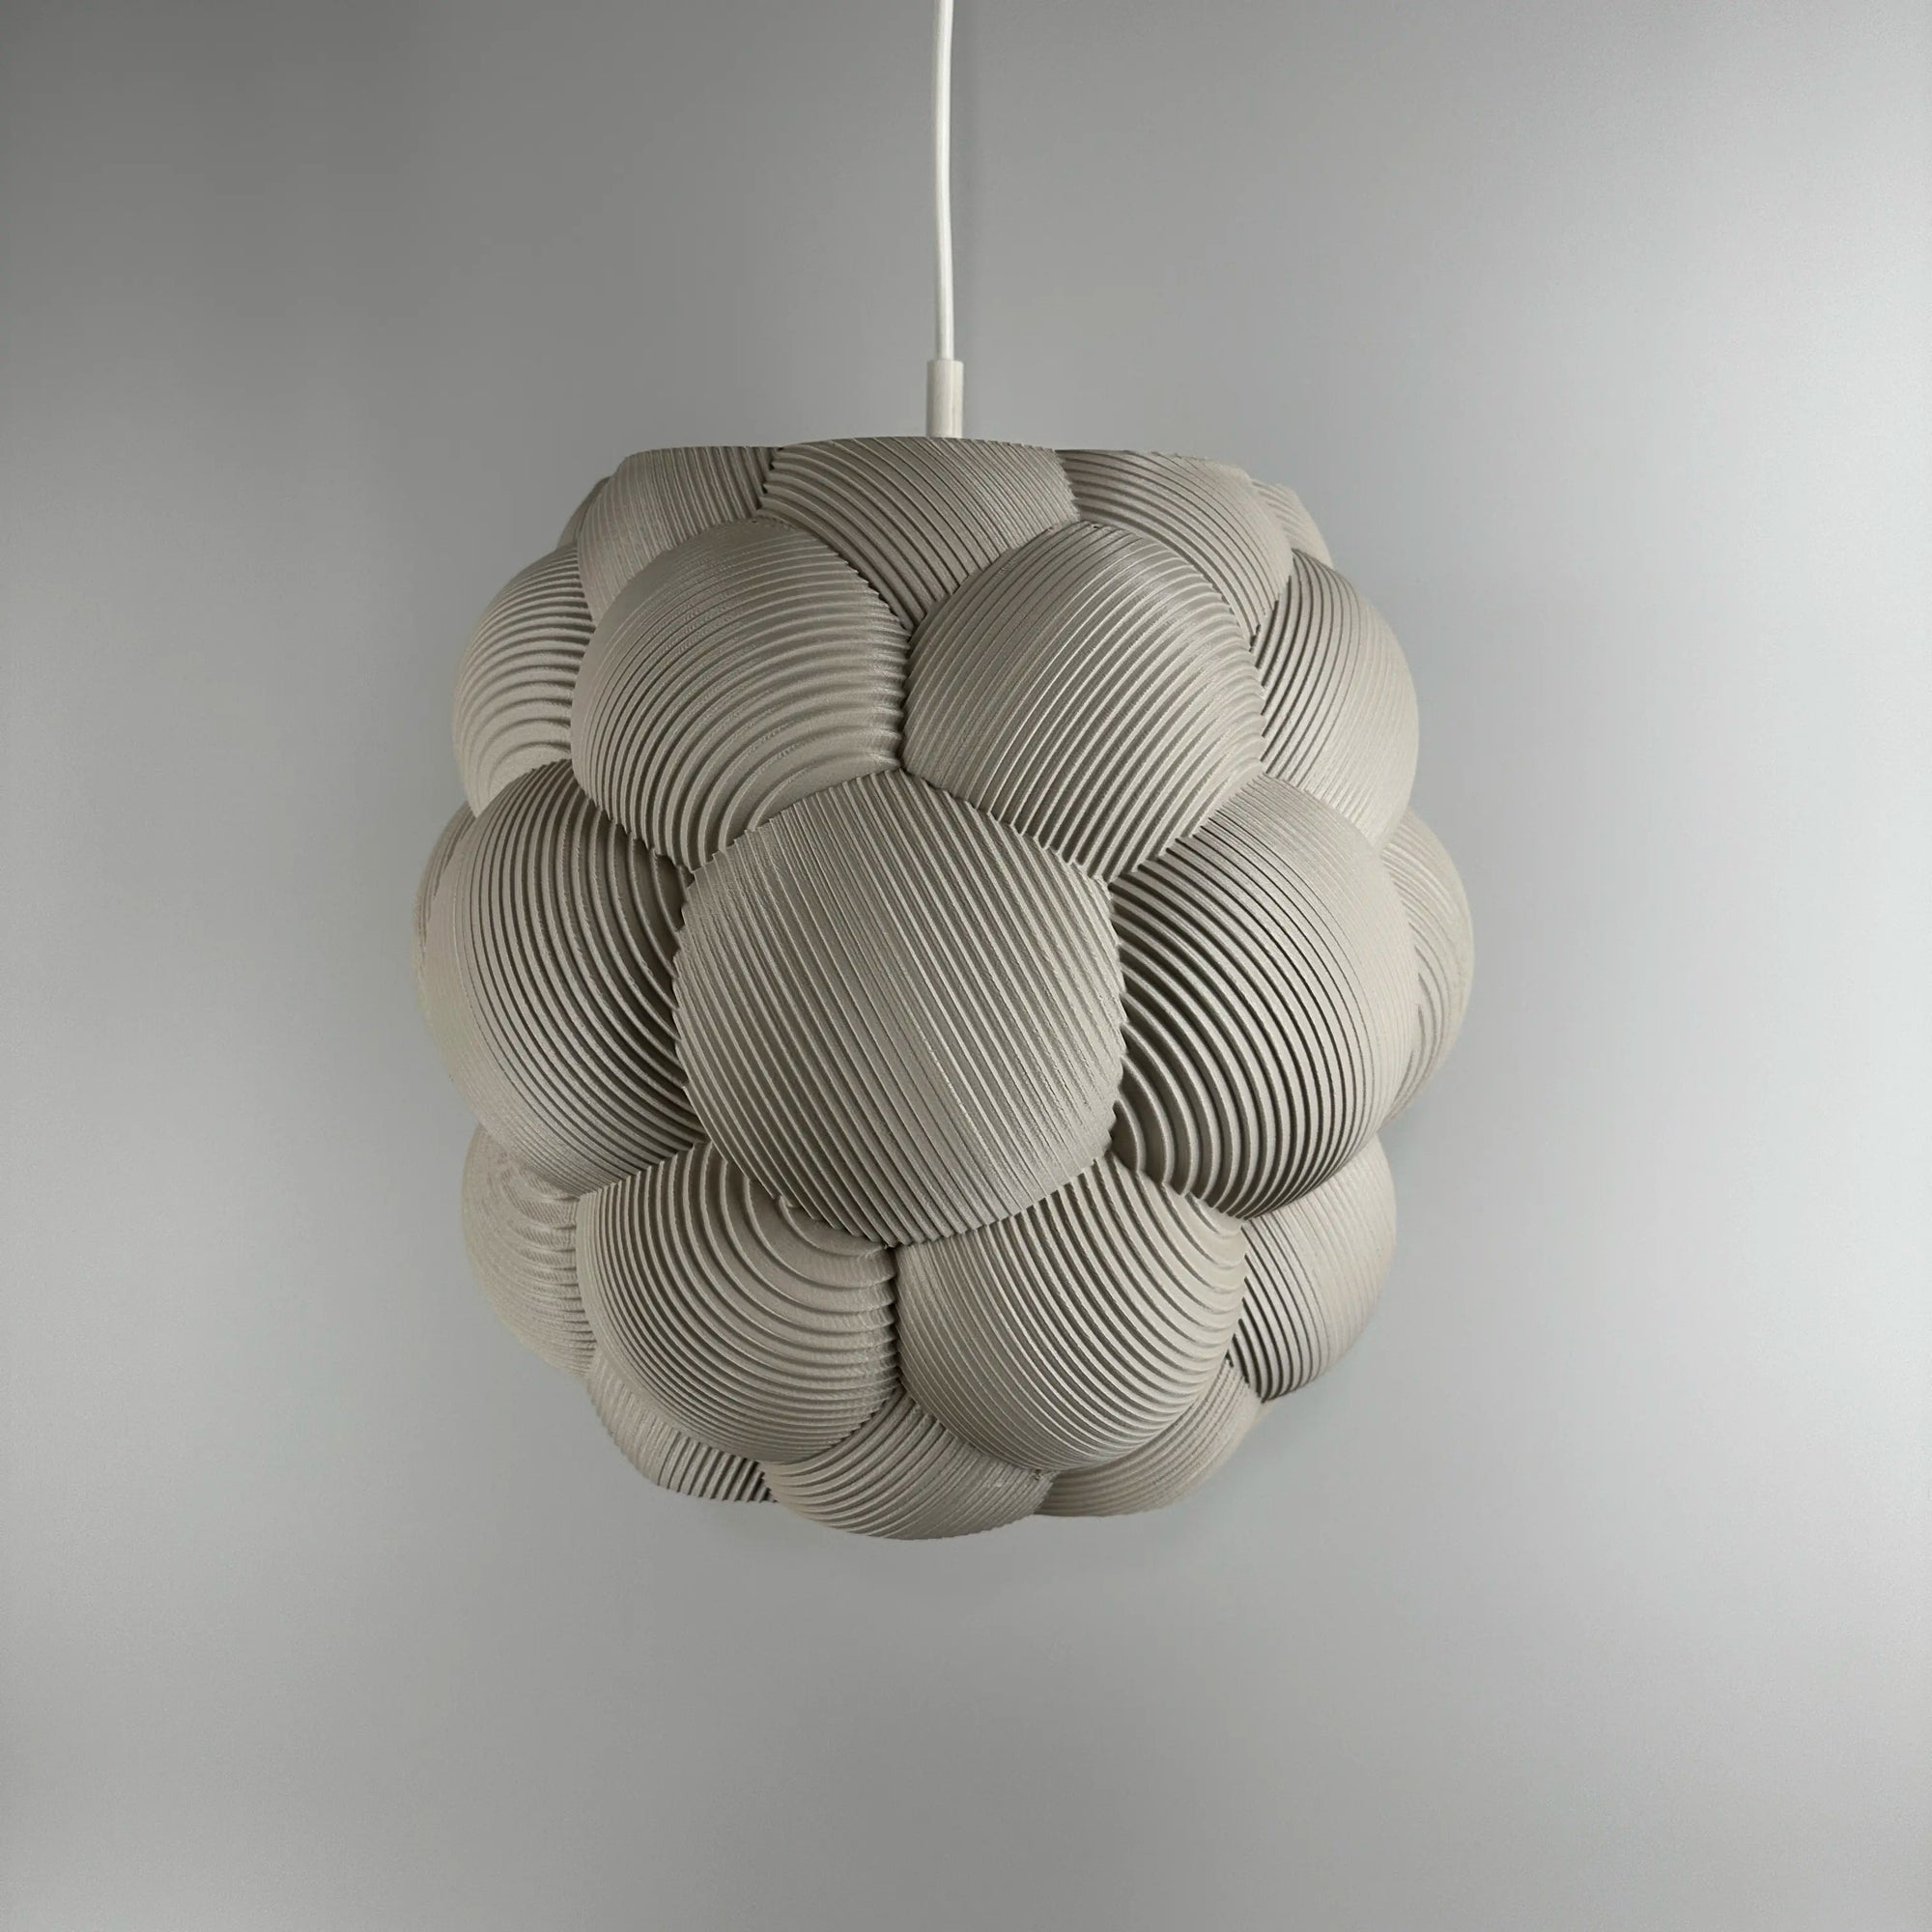 3D printed Apo Malli lampshade in modern design in muted white biodegradable material.